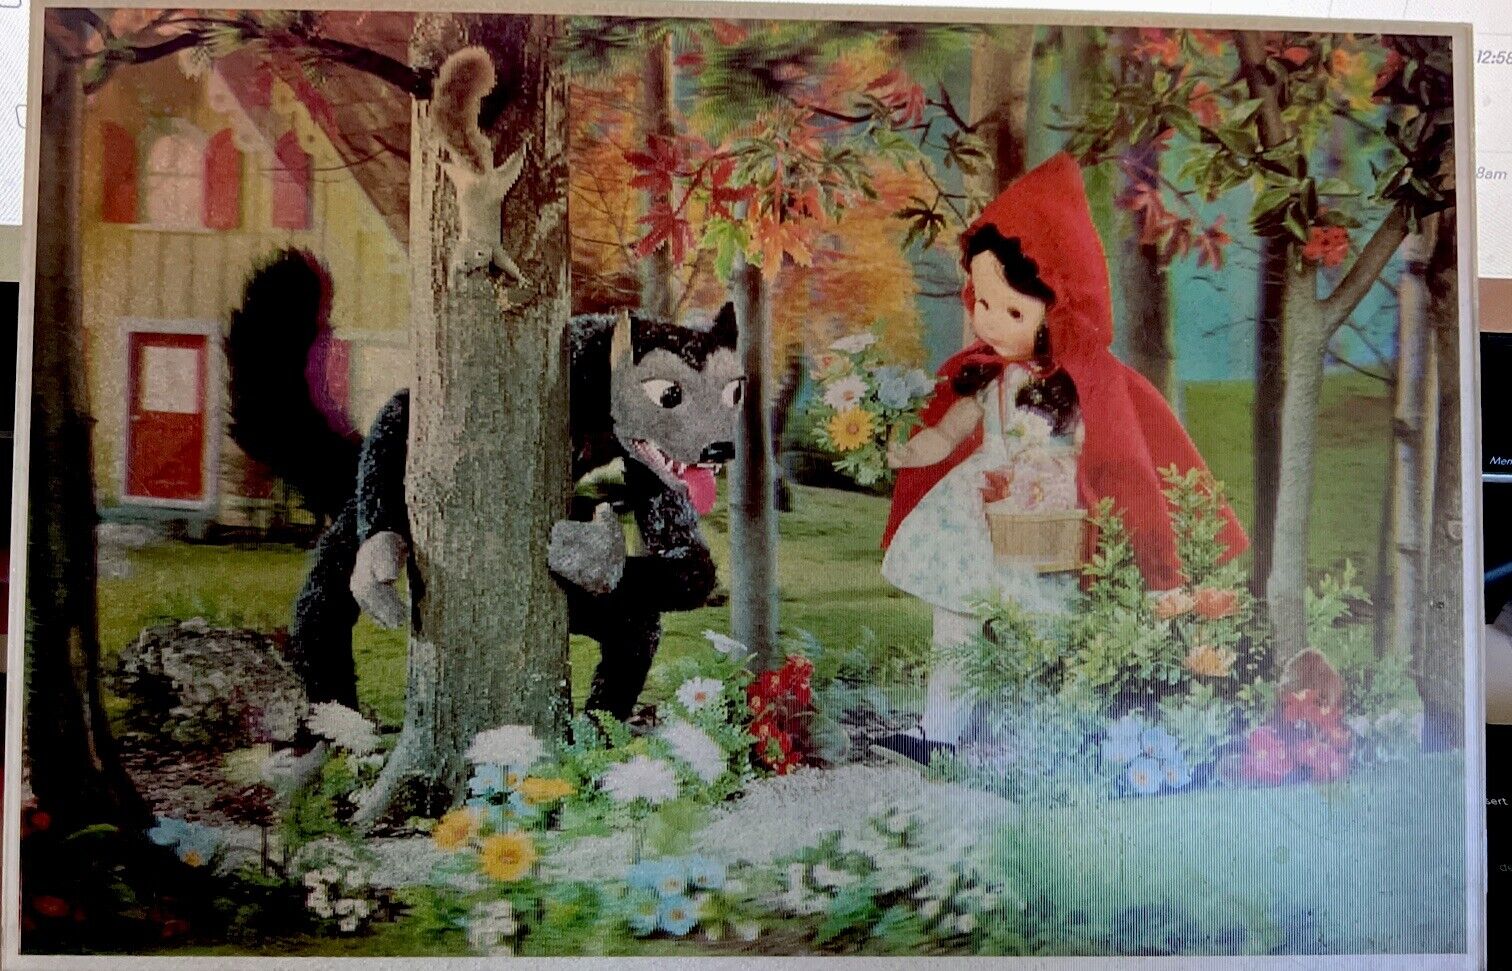 LITTLE RED RIDING HOOD LENTOGRAPH BY VICTOR ANDERSON 3D STUDIOS INC., NY NO.113